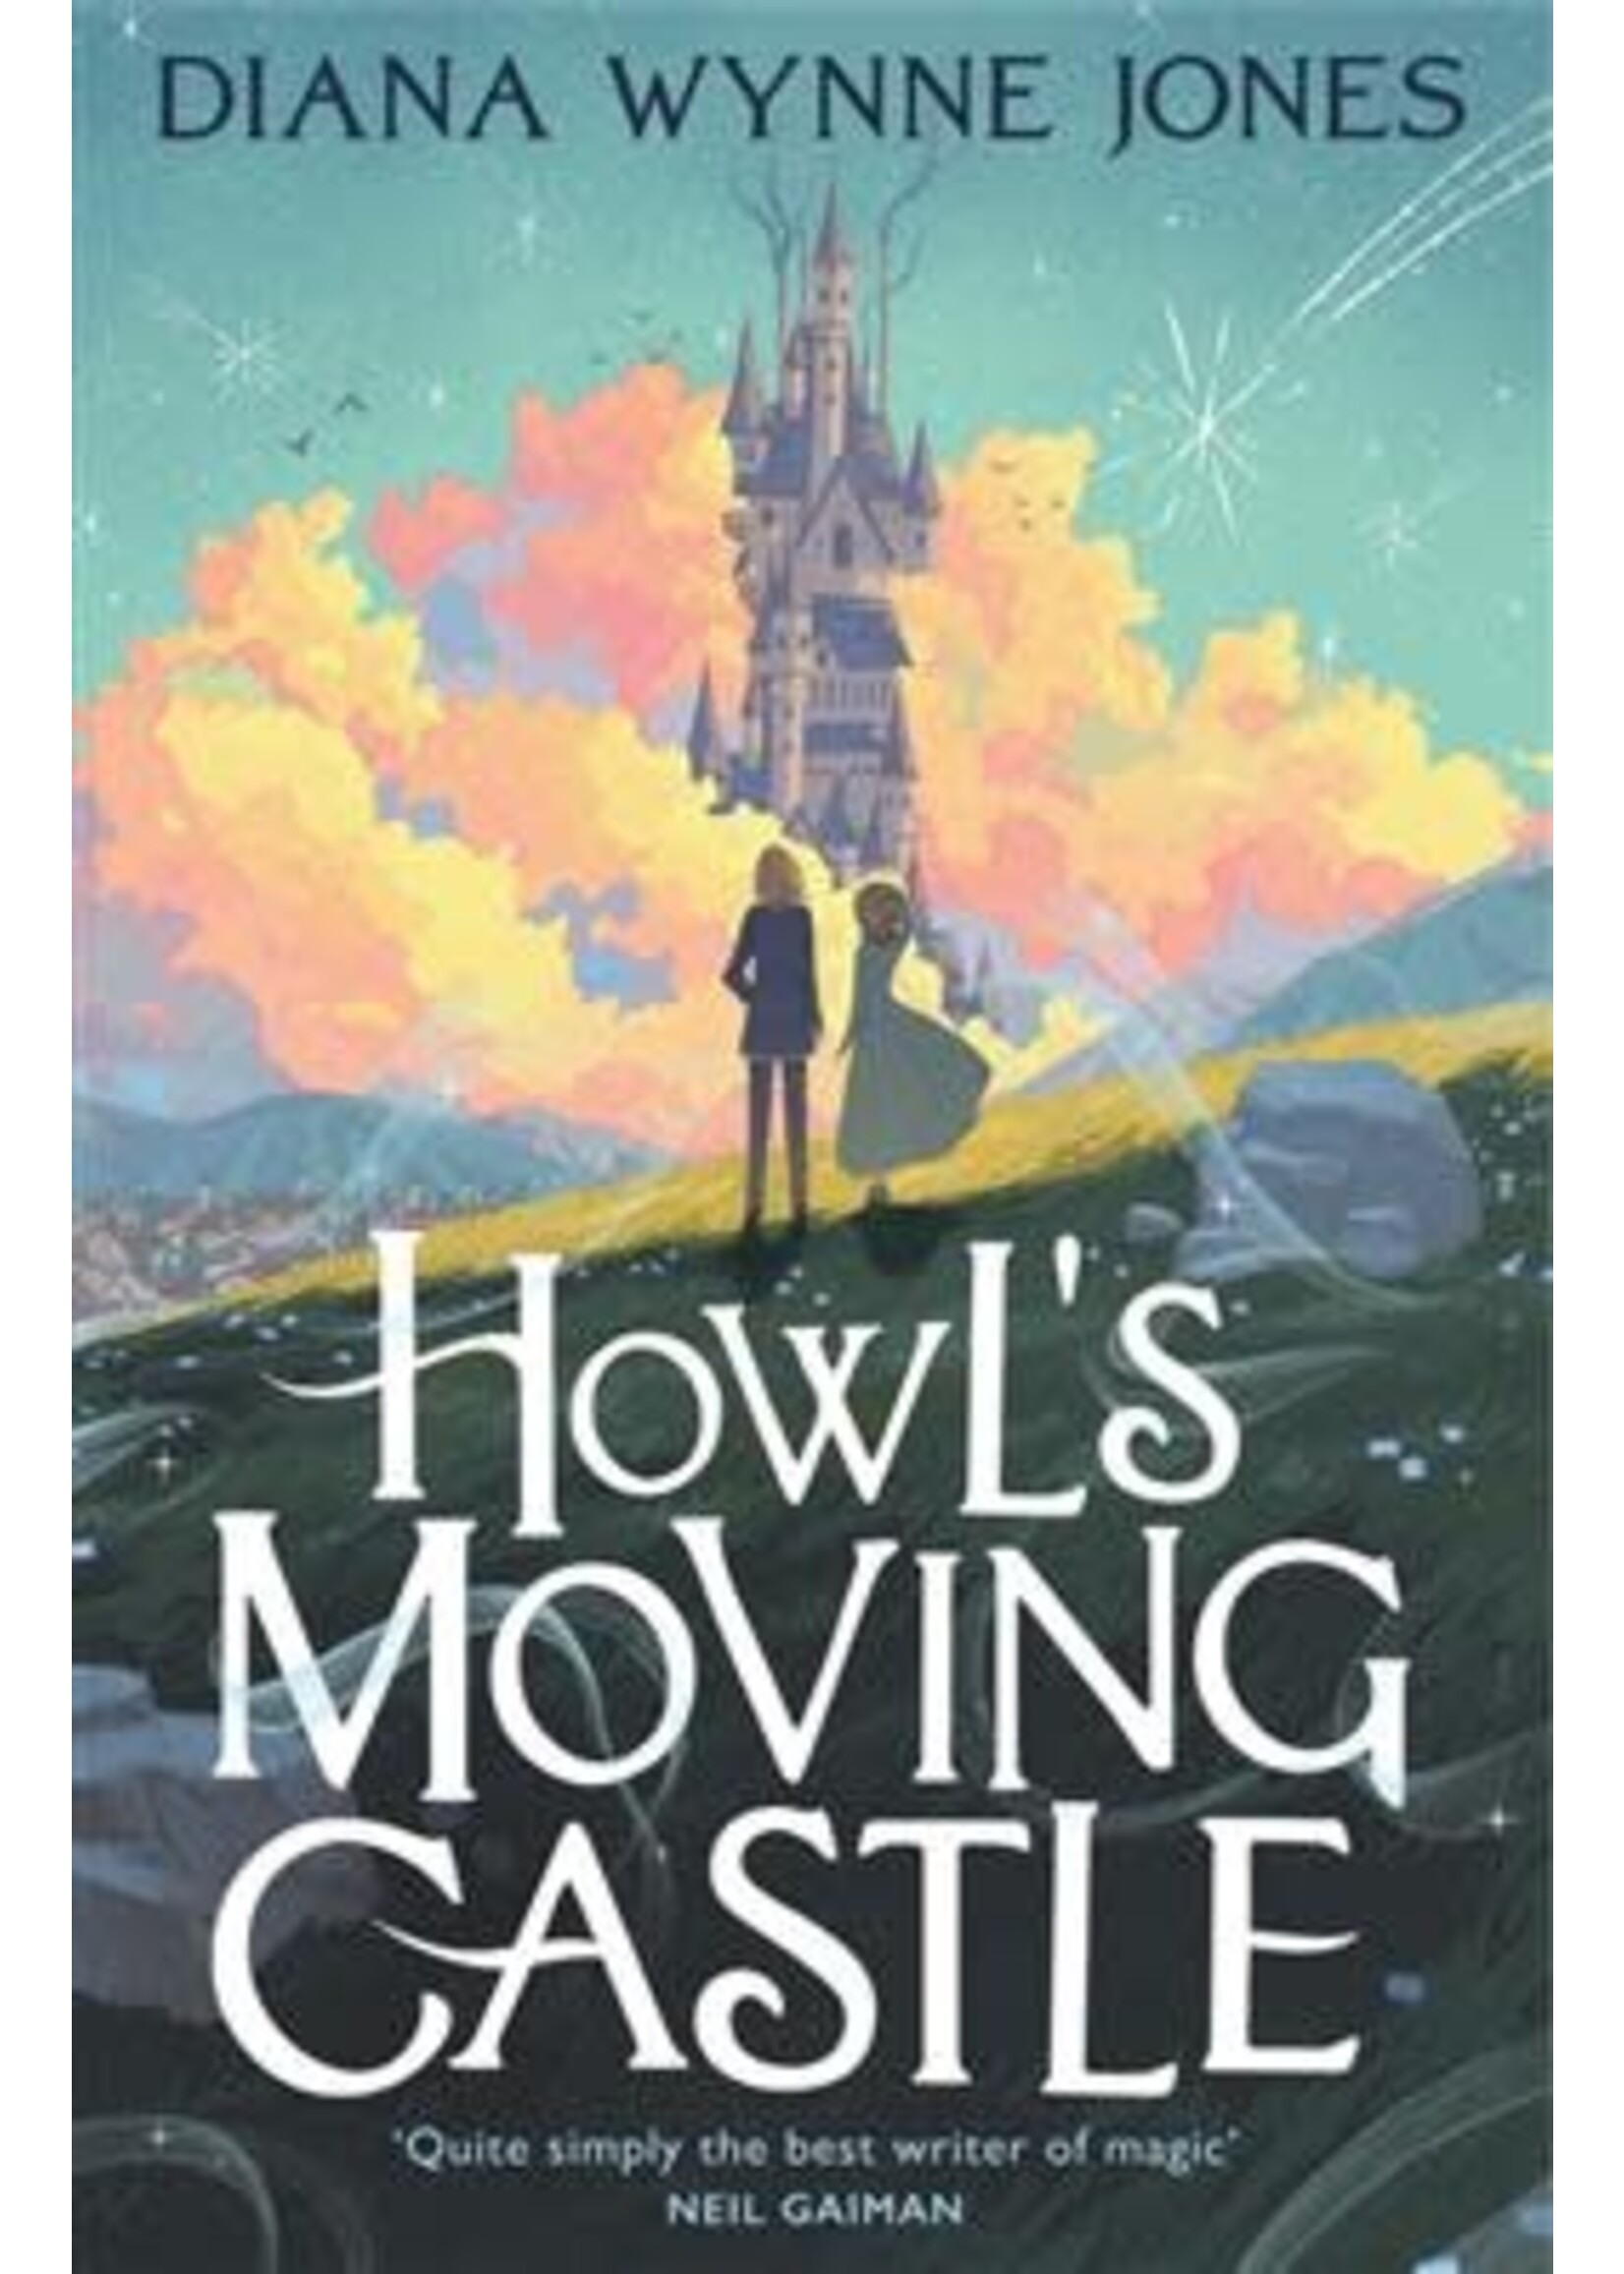 Howl's Moving Castle (Howl's Moving Castle #1) by Diana Wynne Jones